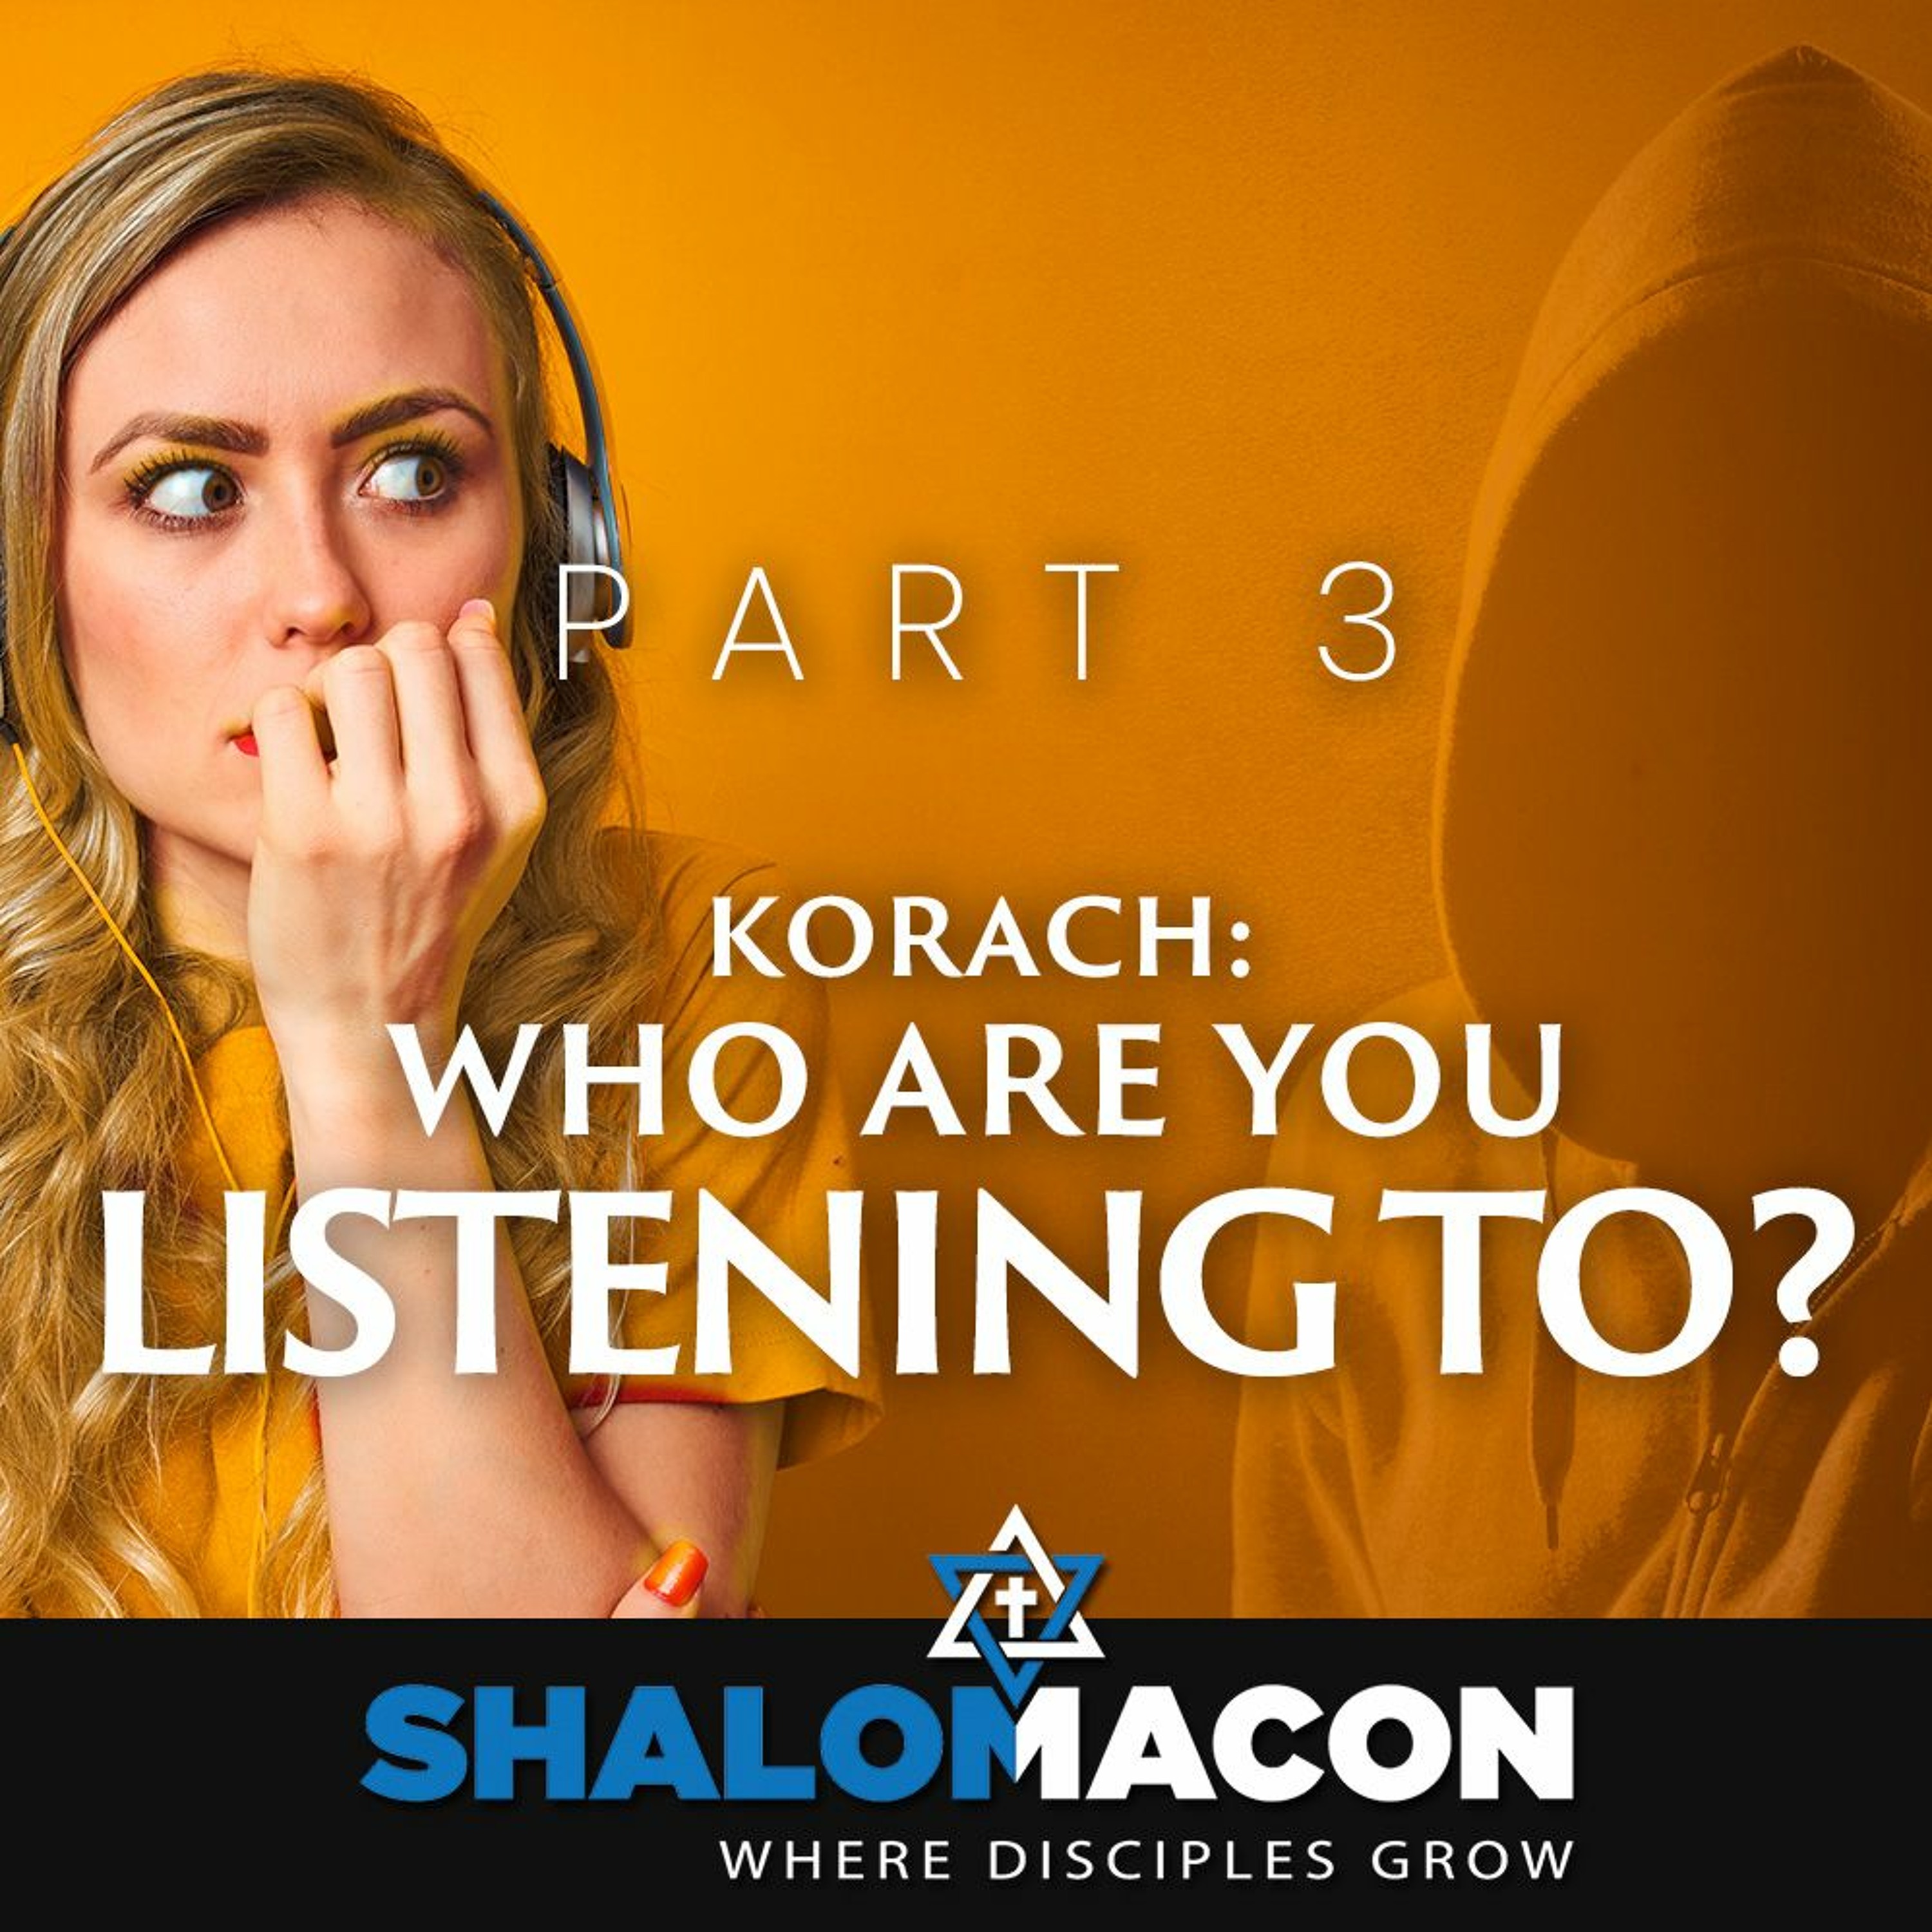 Korach - Who Are You Listening To? (Part 3)